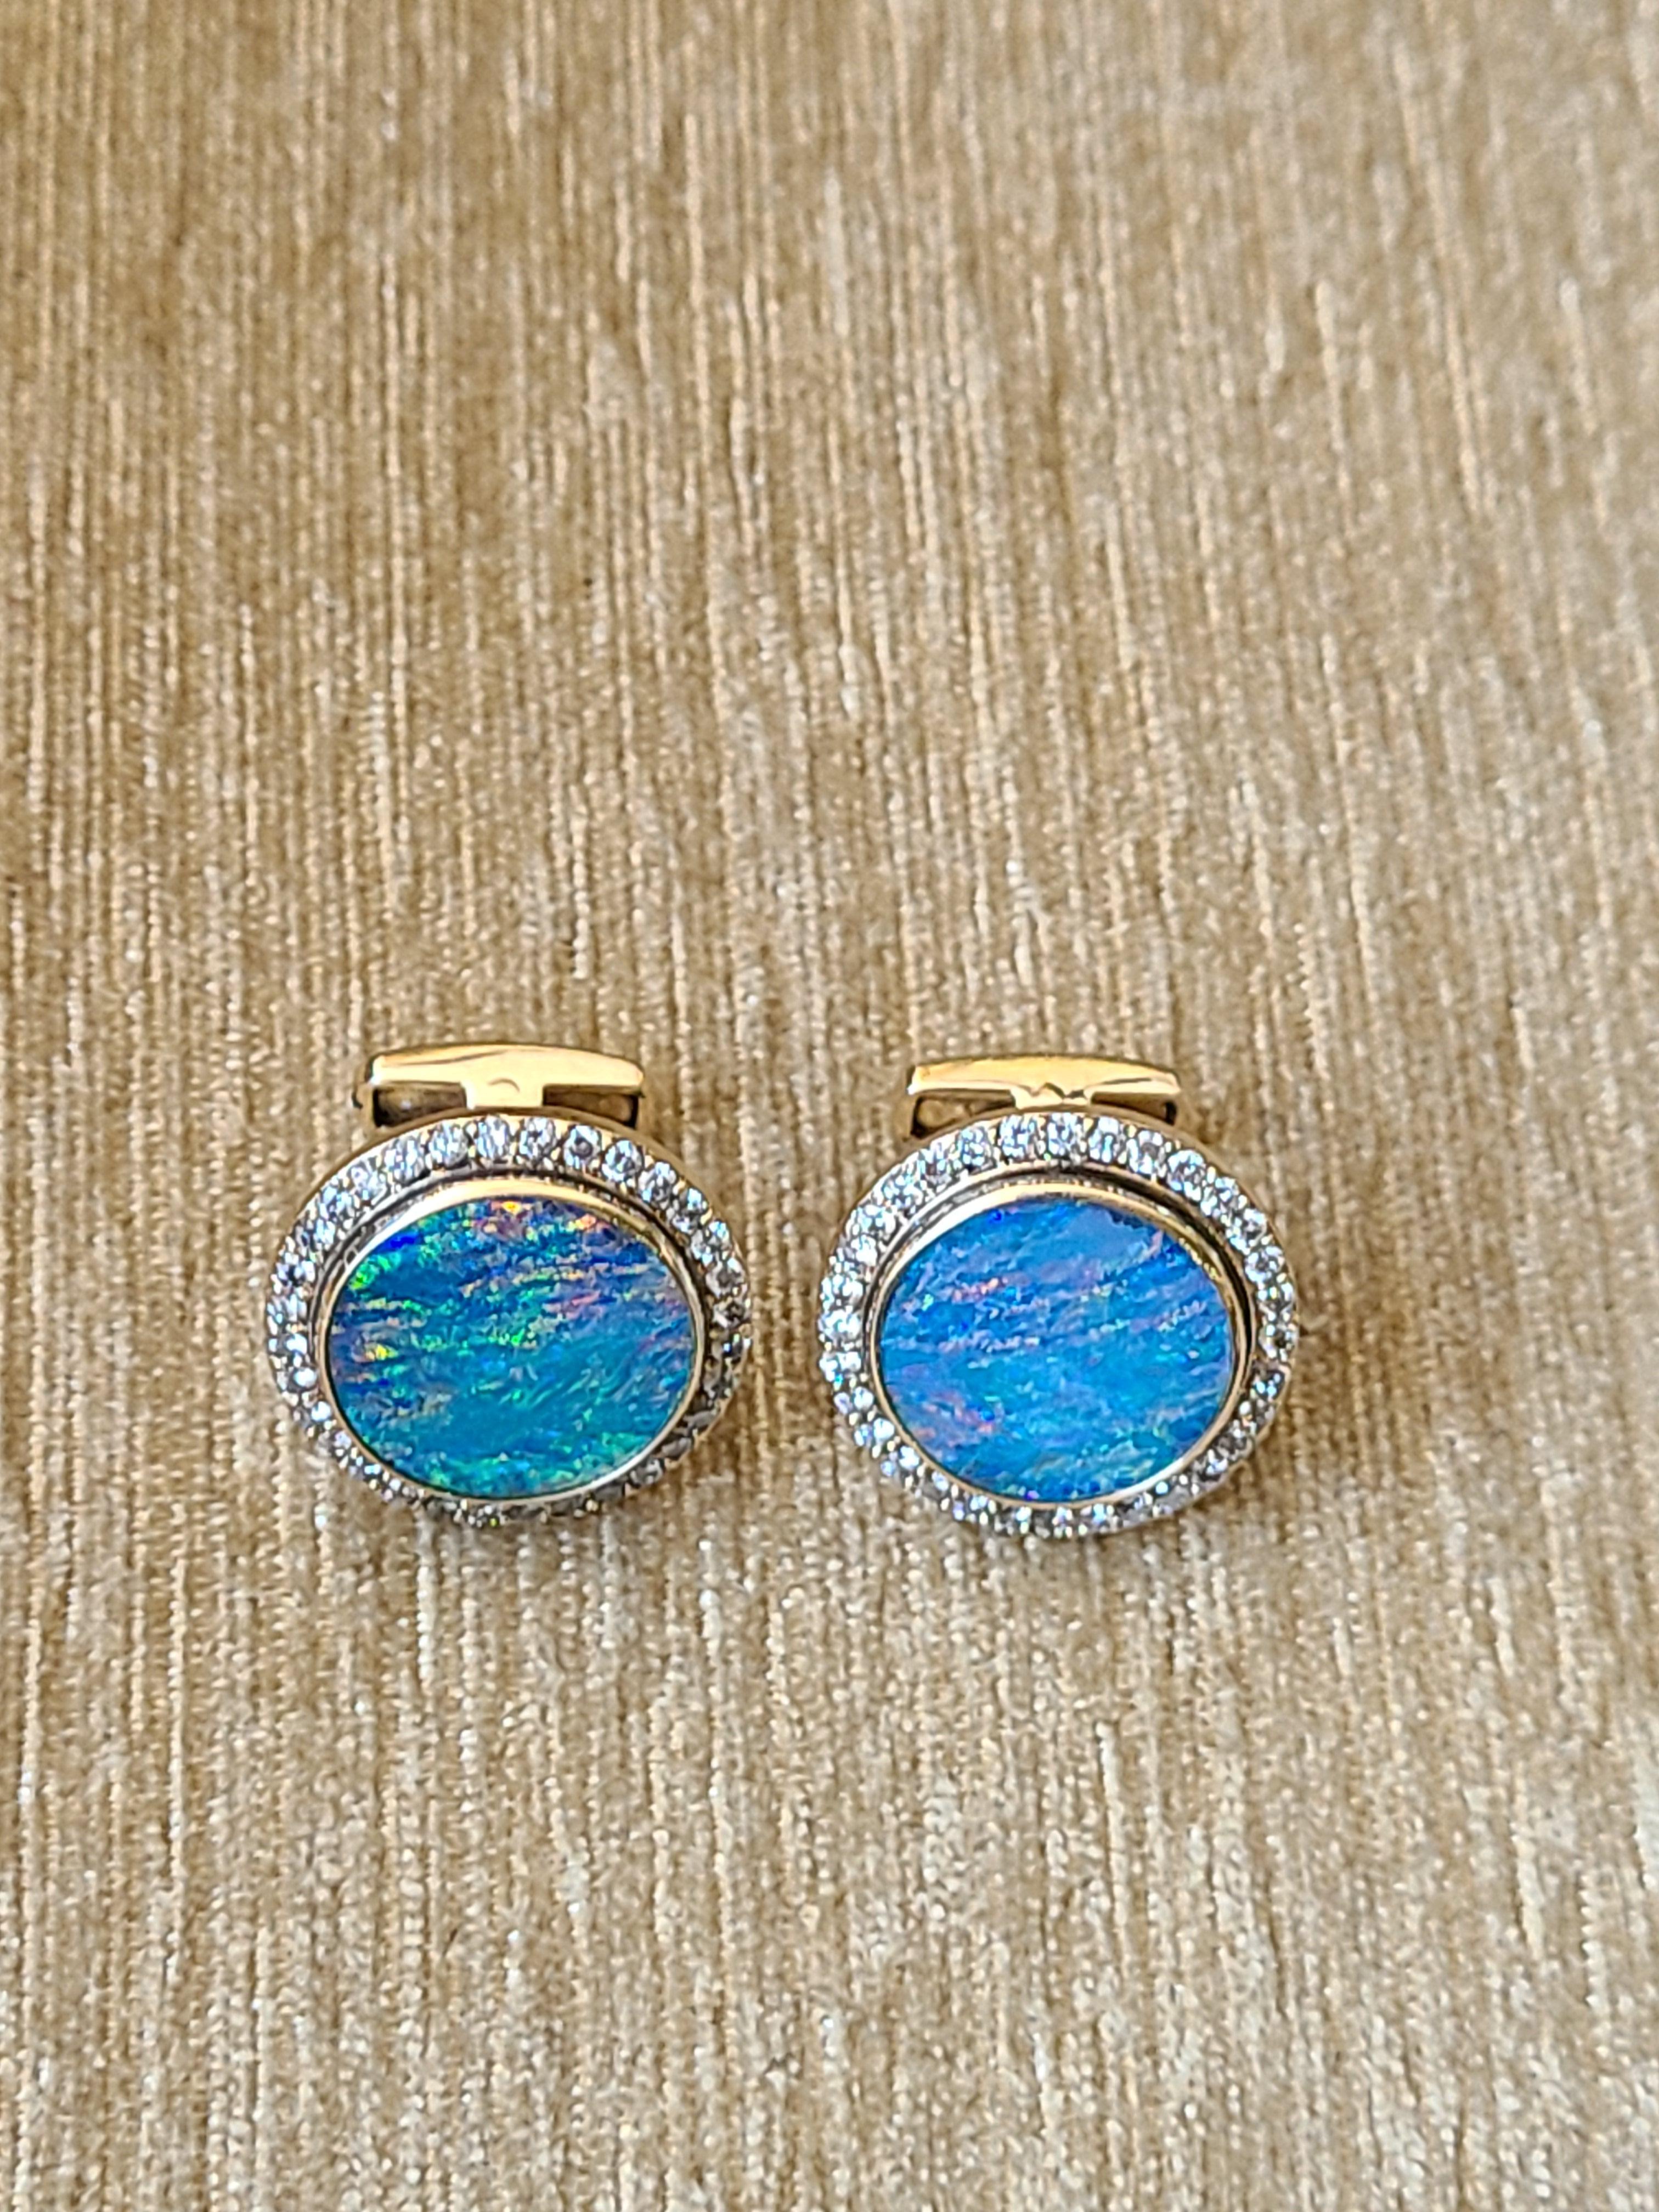 A pair of gorgeous and modern Australian doublet opal cufflinks with diamonds in 14k yellow gold. The opal weight is 8.76 carats and diamond weight is  1.2 carats. The net gold weight of cufflinks is 10.819 grams and dimensions in cm 2 x 2 x 2.1